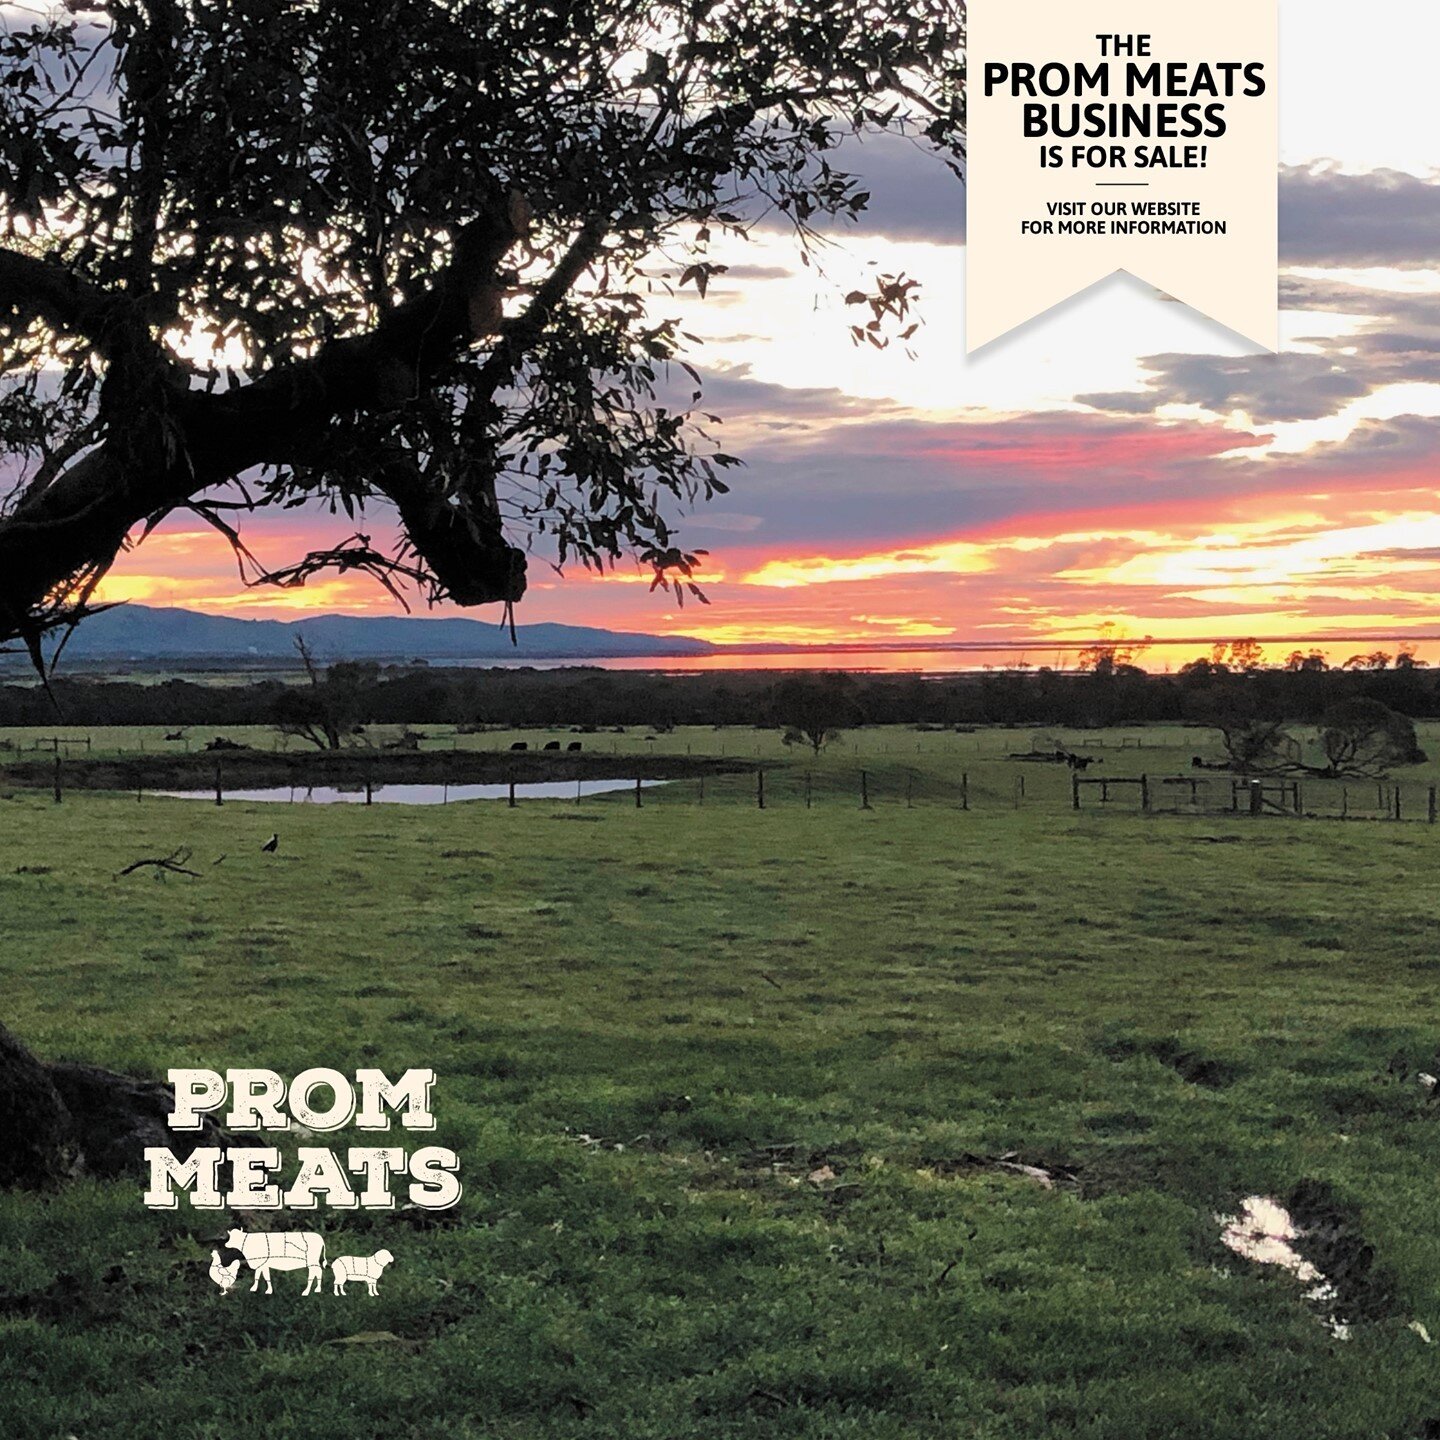 Did you know that our quality beef &amp; lamb is supplied by 3rd generation family farm, Tynacya Farm, in Foster? 🐑🐄🌳⁠
⁠
#food #foodie #southgippsland #promcoast #promcountry #foster #paddocktoplate #sustainable #ethicalfarming #forsale #businessf